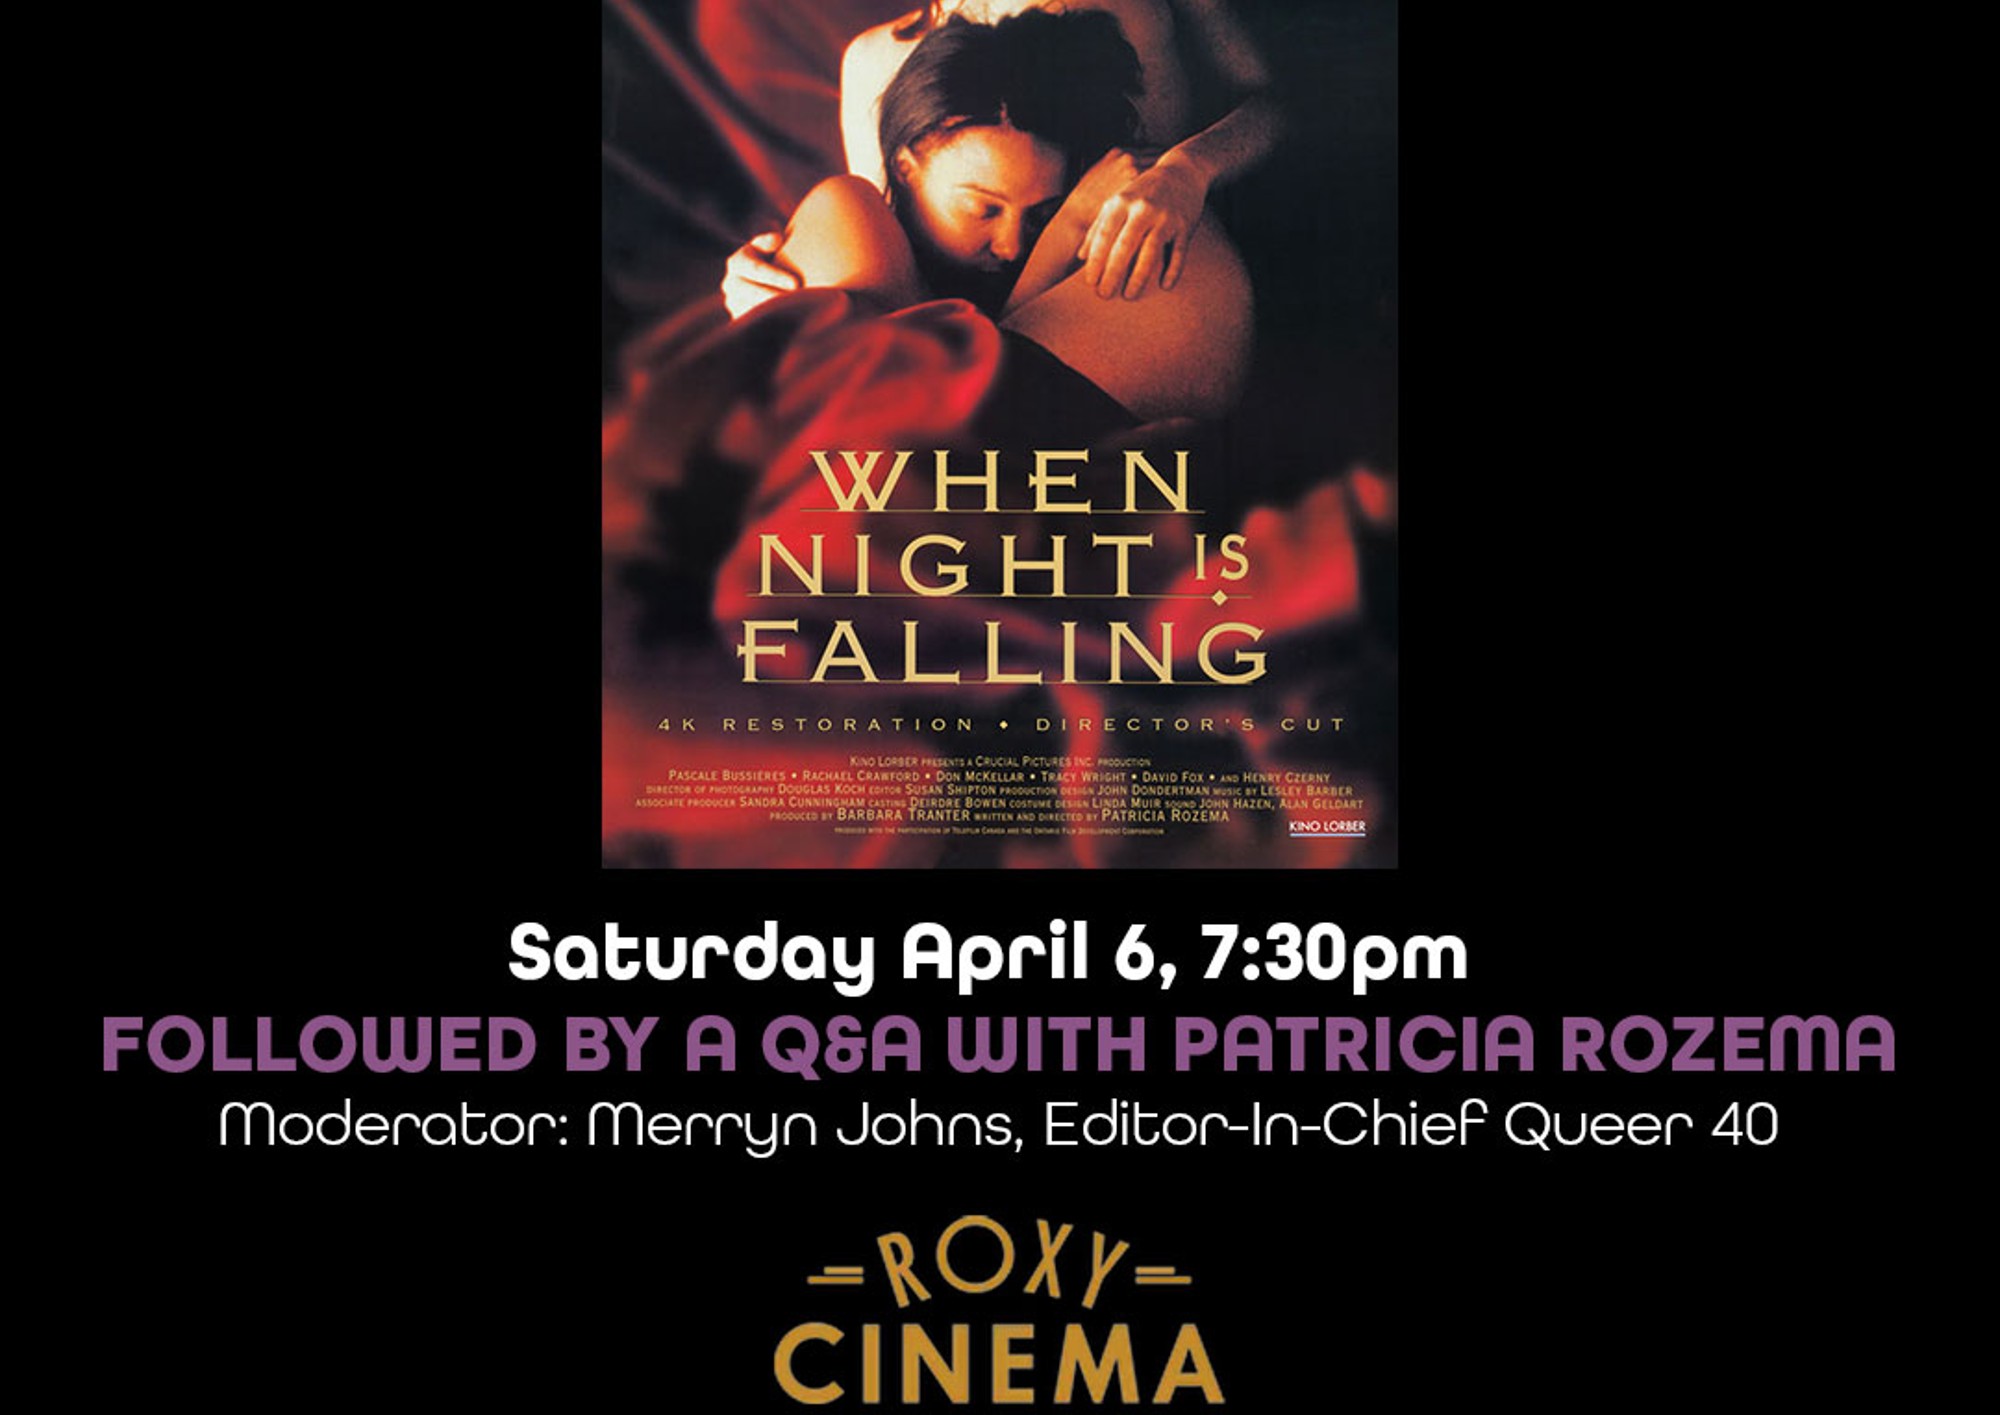 Poster for Q&A with Patricia Rozema for her film When Night is Falling